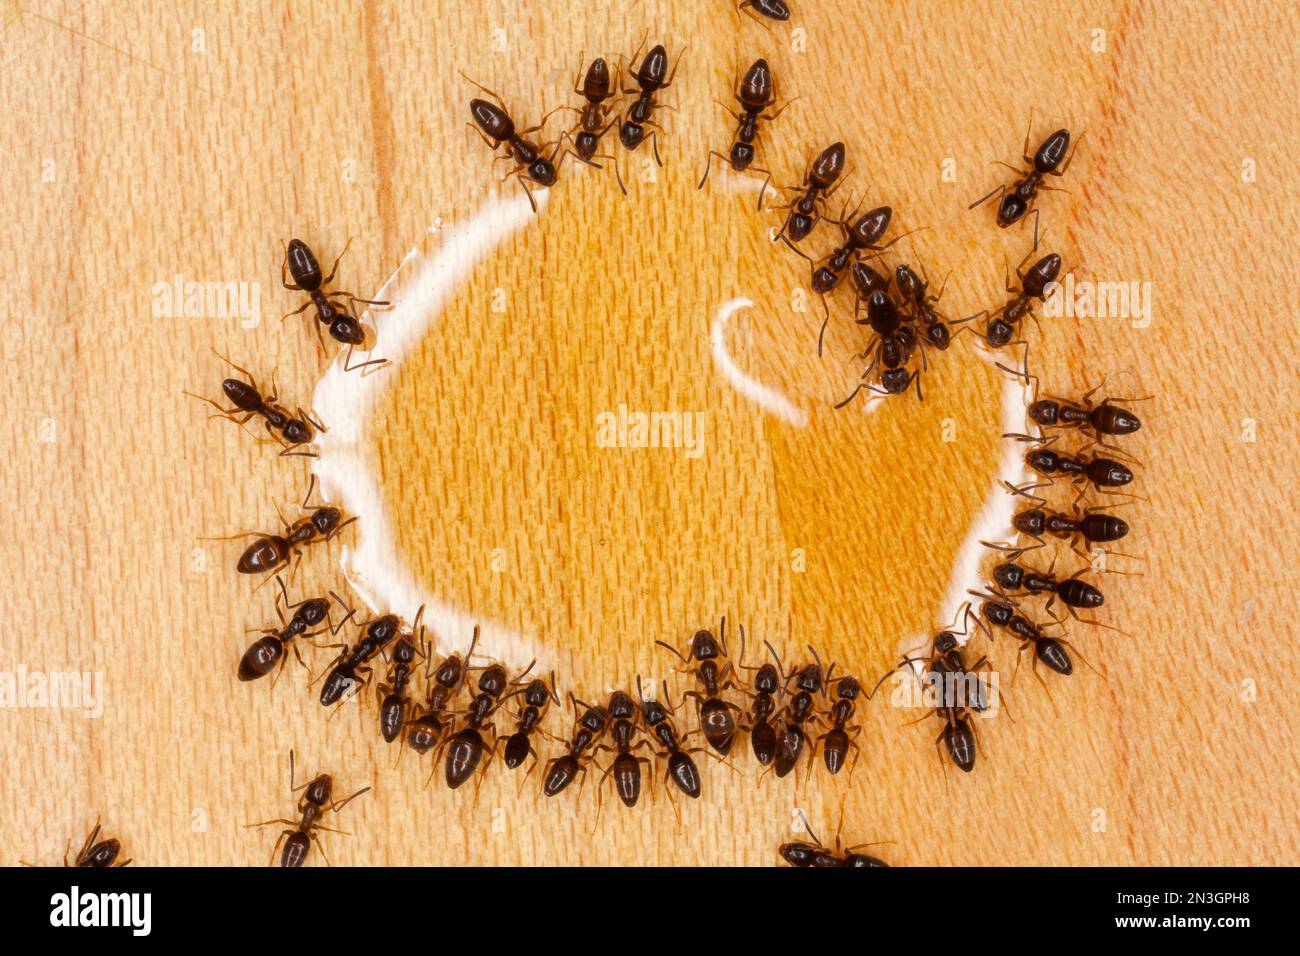 Group of odorous house ants (Tapinoma sessile) drink from a drop of water on the floor; Lincoln, Nebraska, United States of America Stock Photo